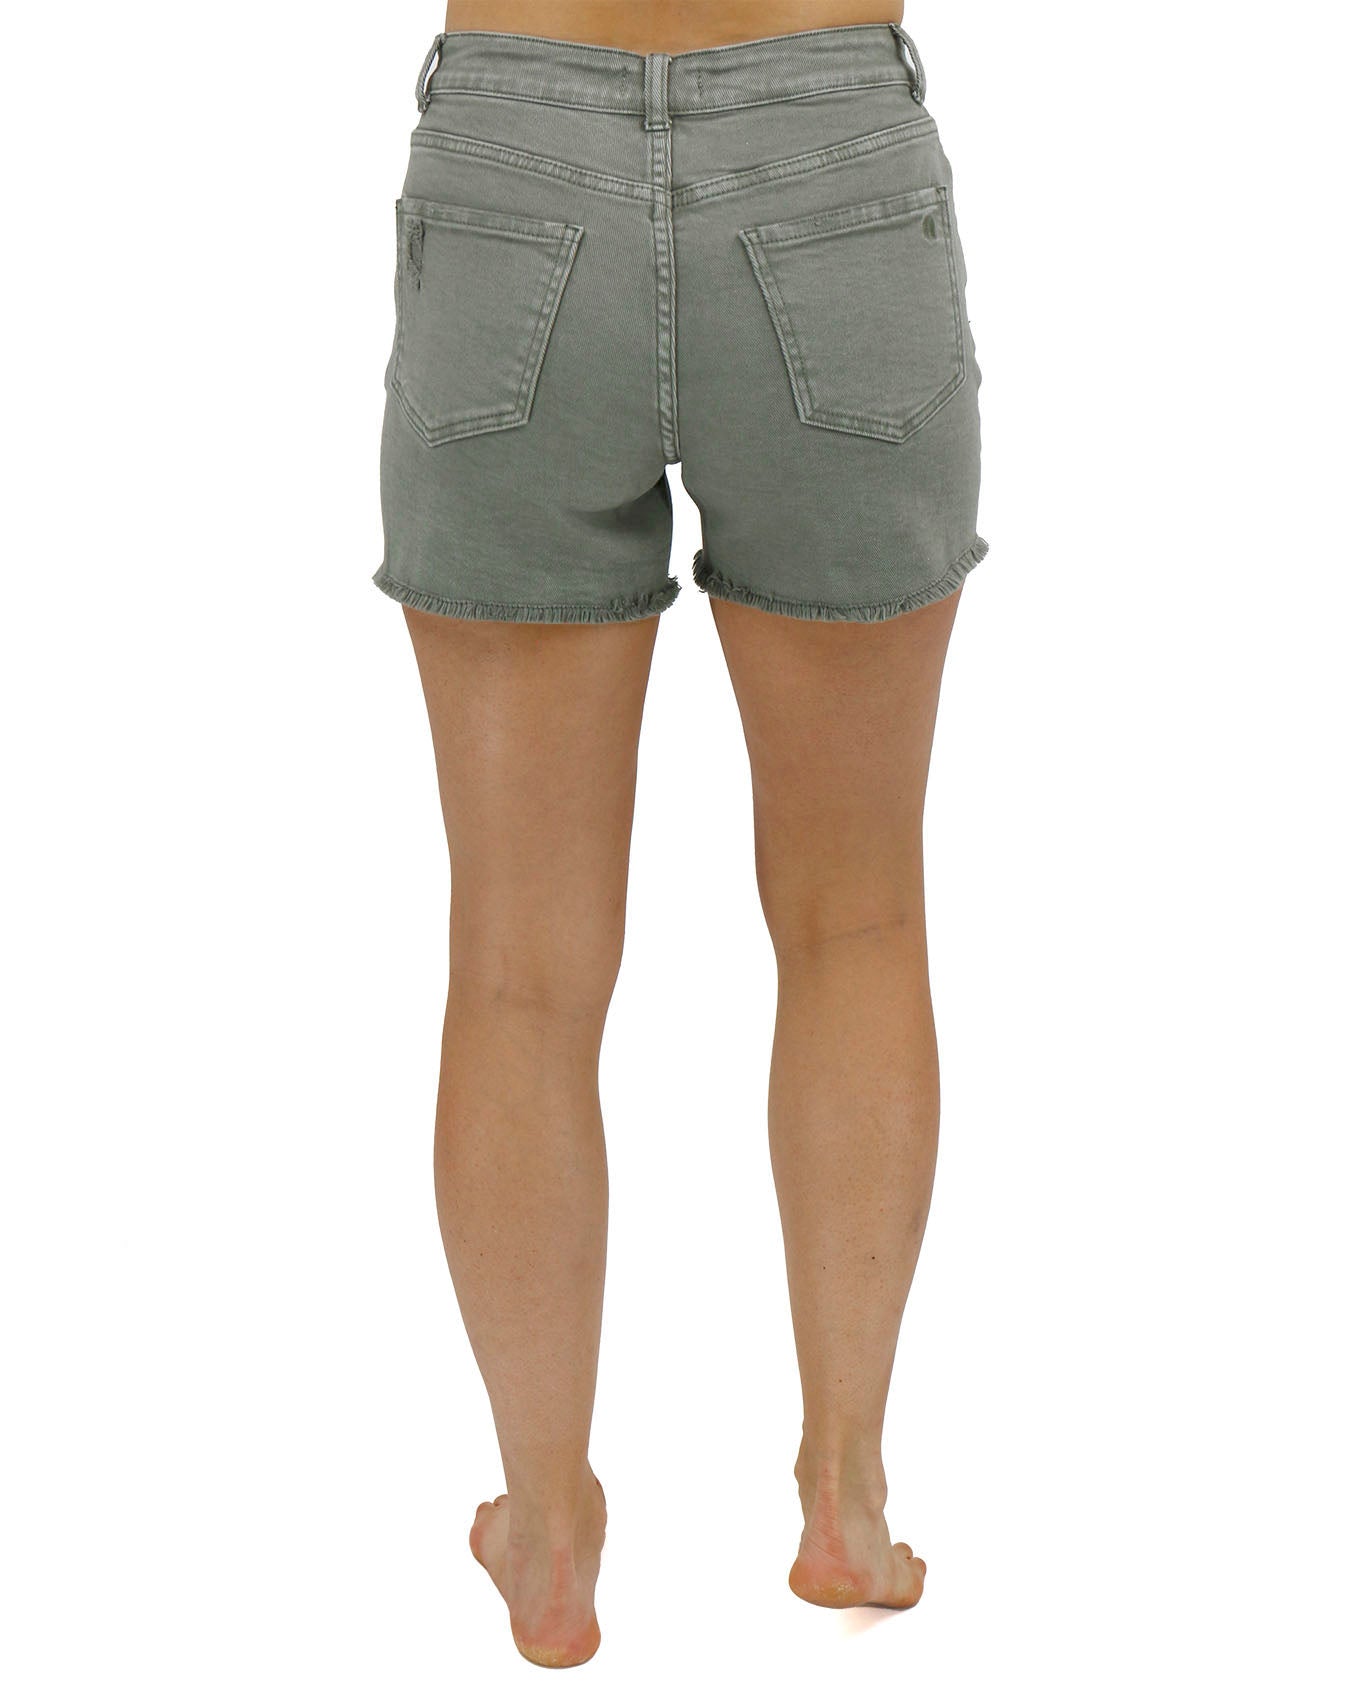 Olive Casual Colored Denim Shorts back detail